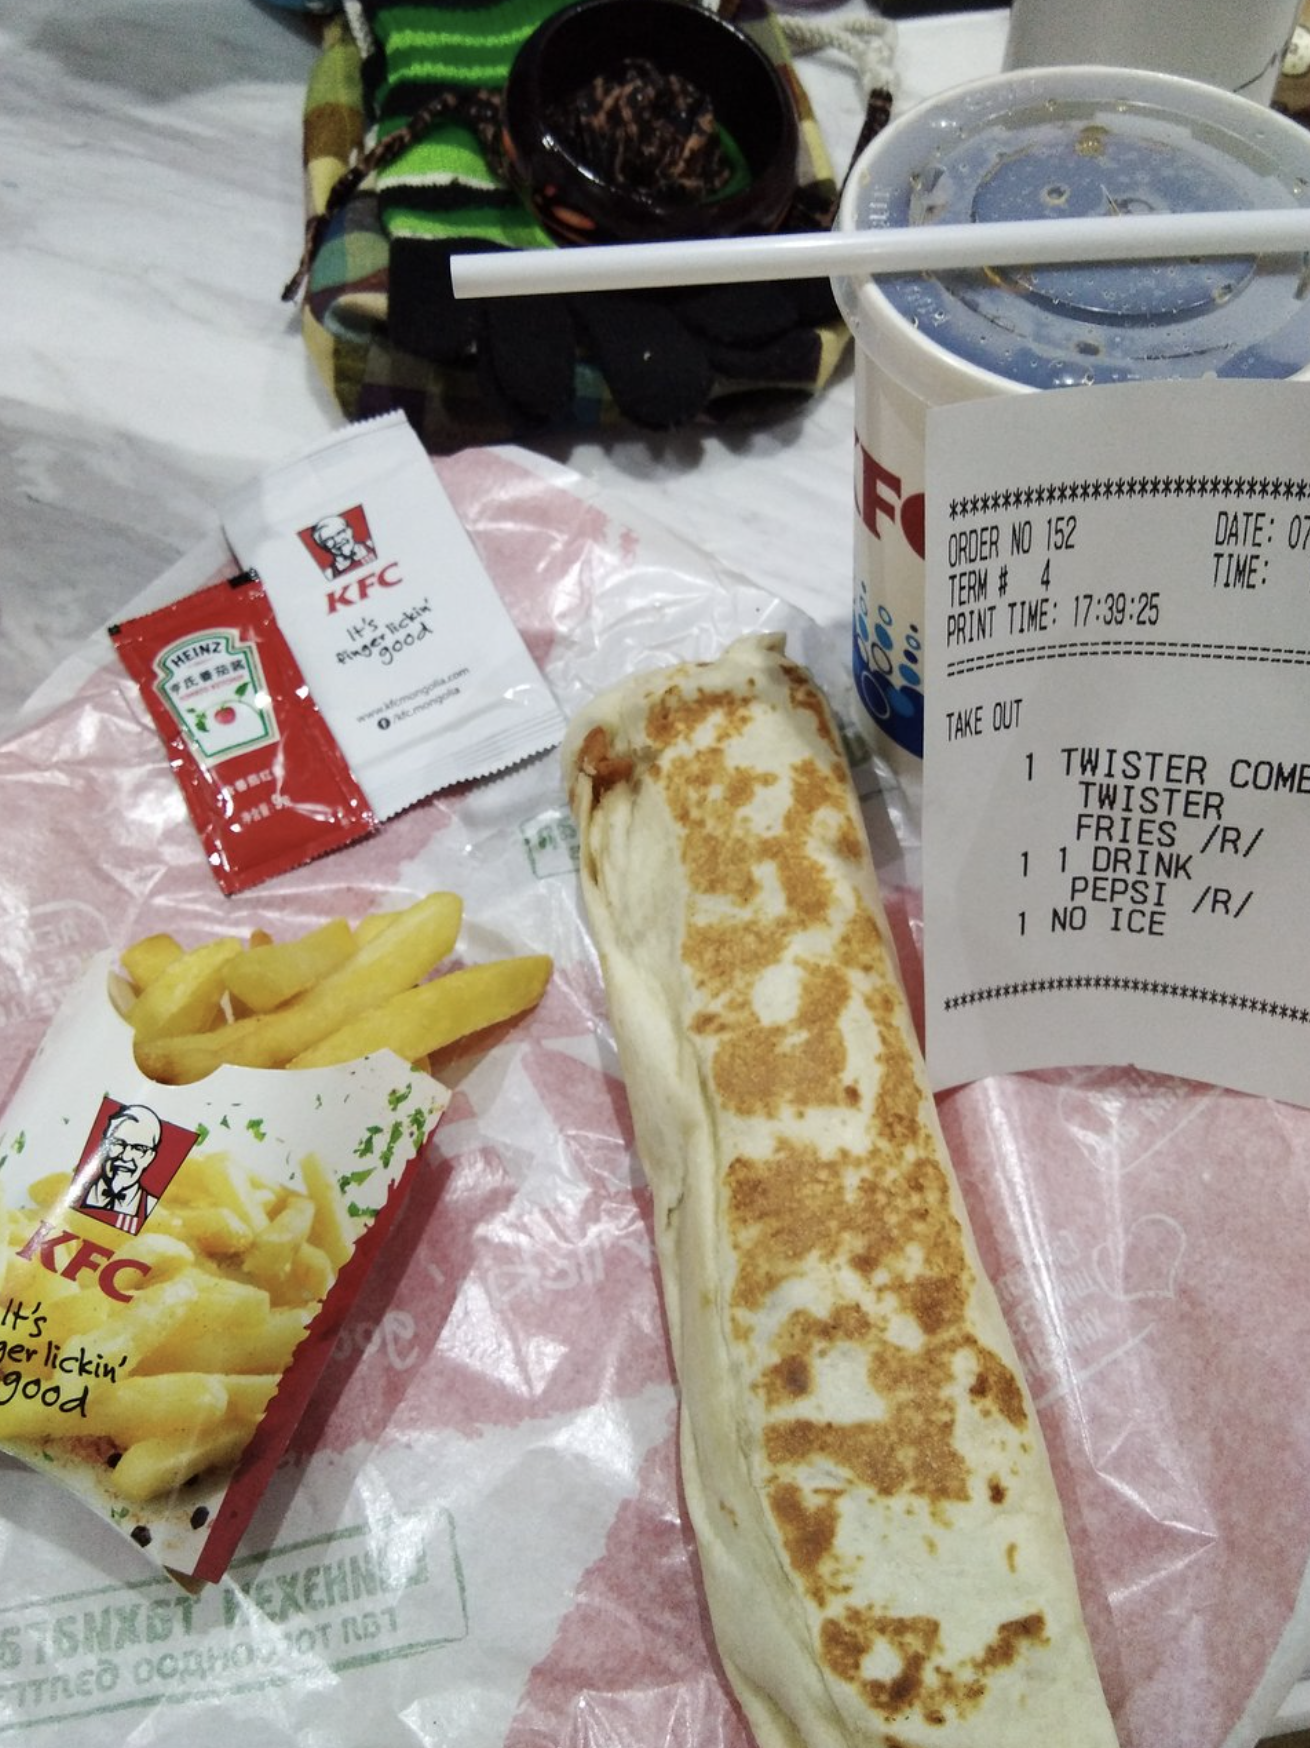 A KFC order featuring a toasted Twister, chips, a drink and sauce packets